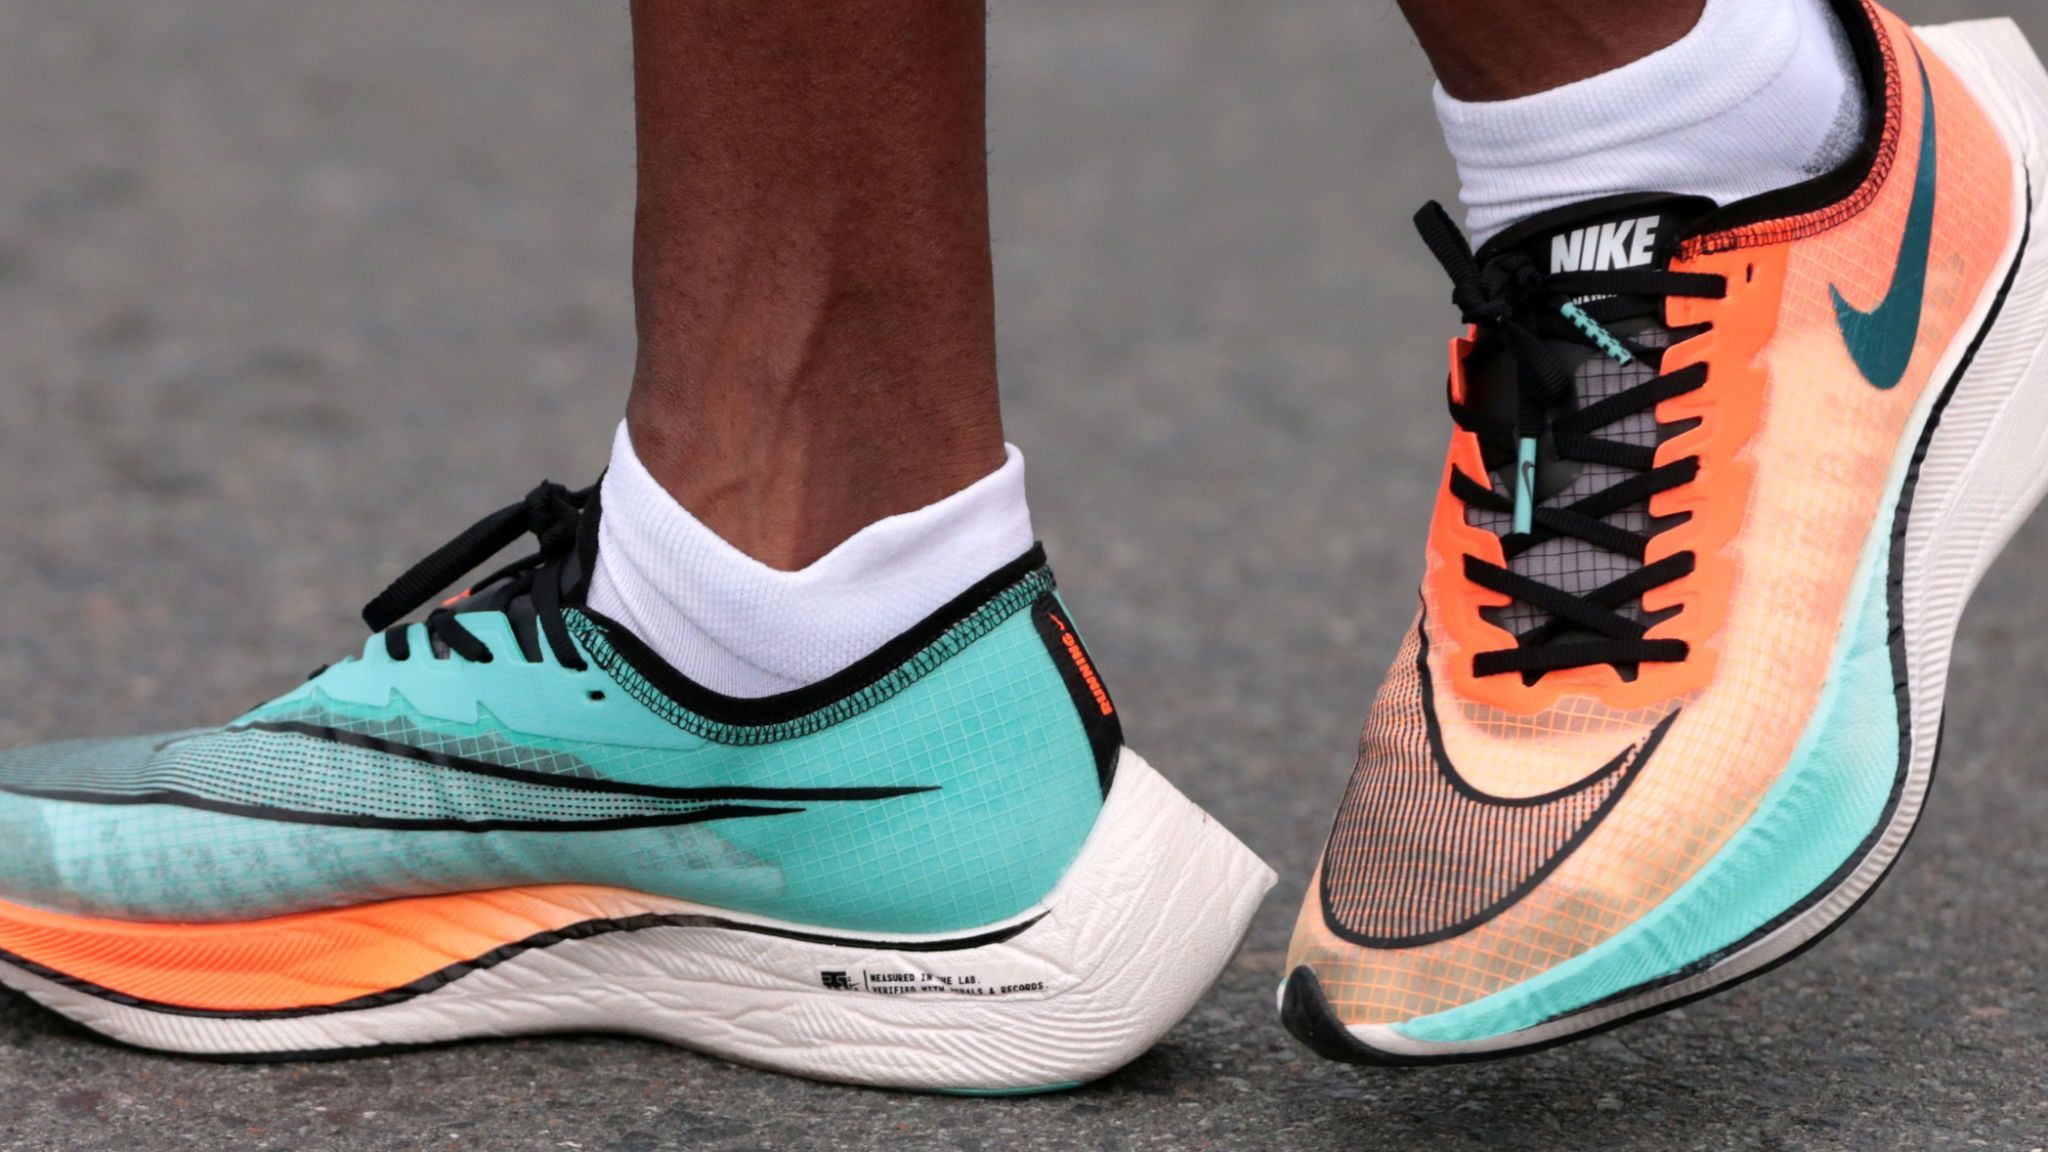 Nike Shoes Vs. Other Brands: What Makes 